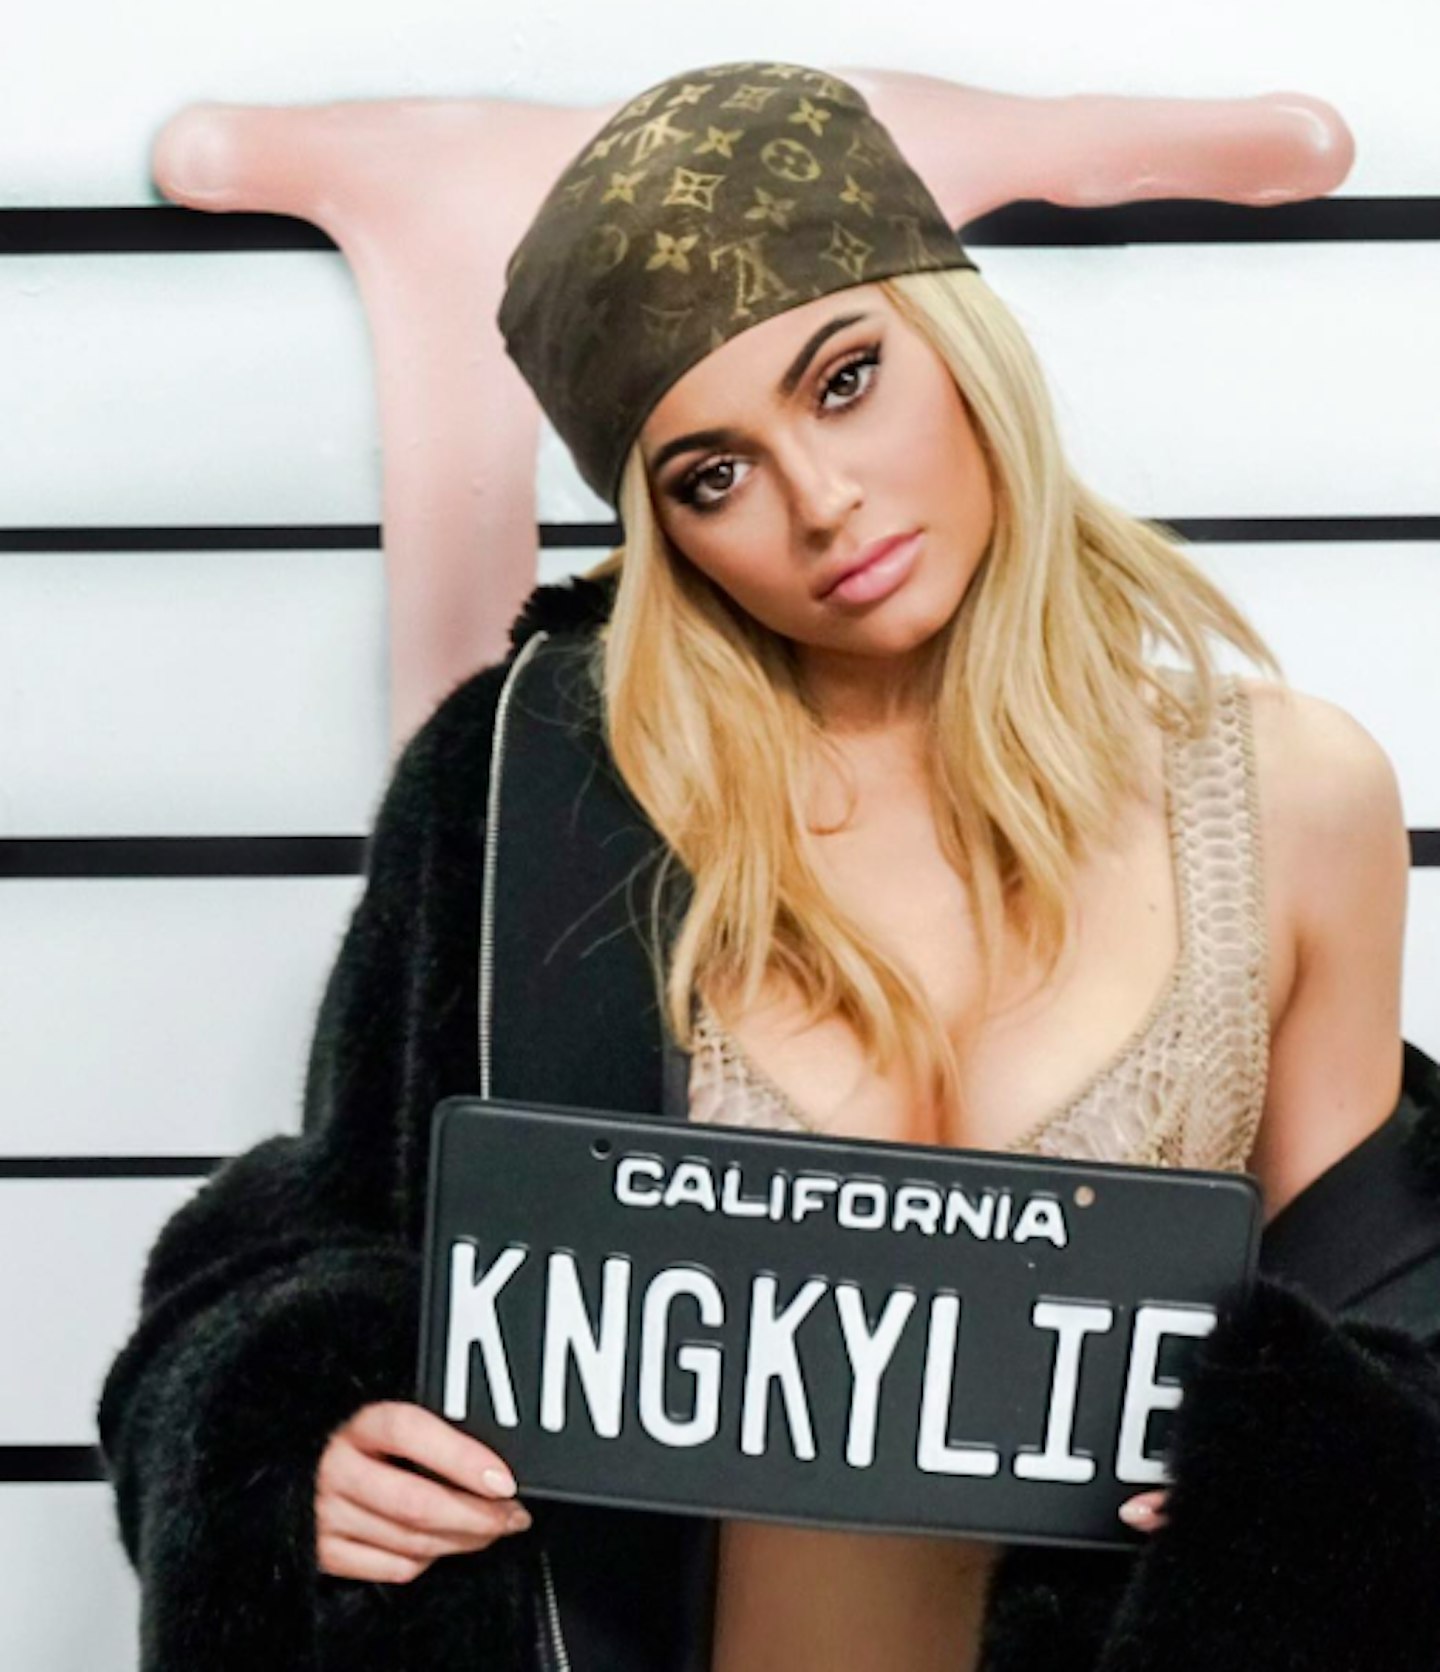 Kylie Jenner launches lip glosses. Sells out immediately